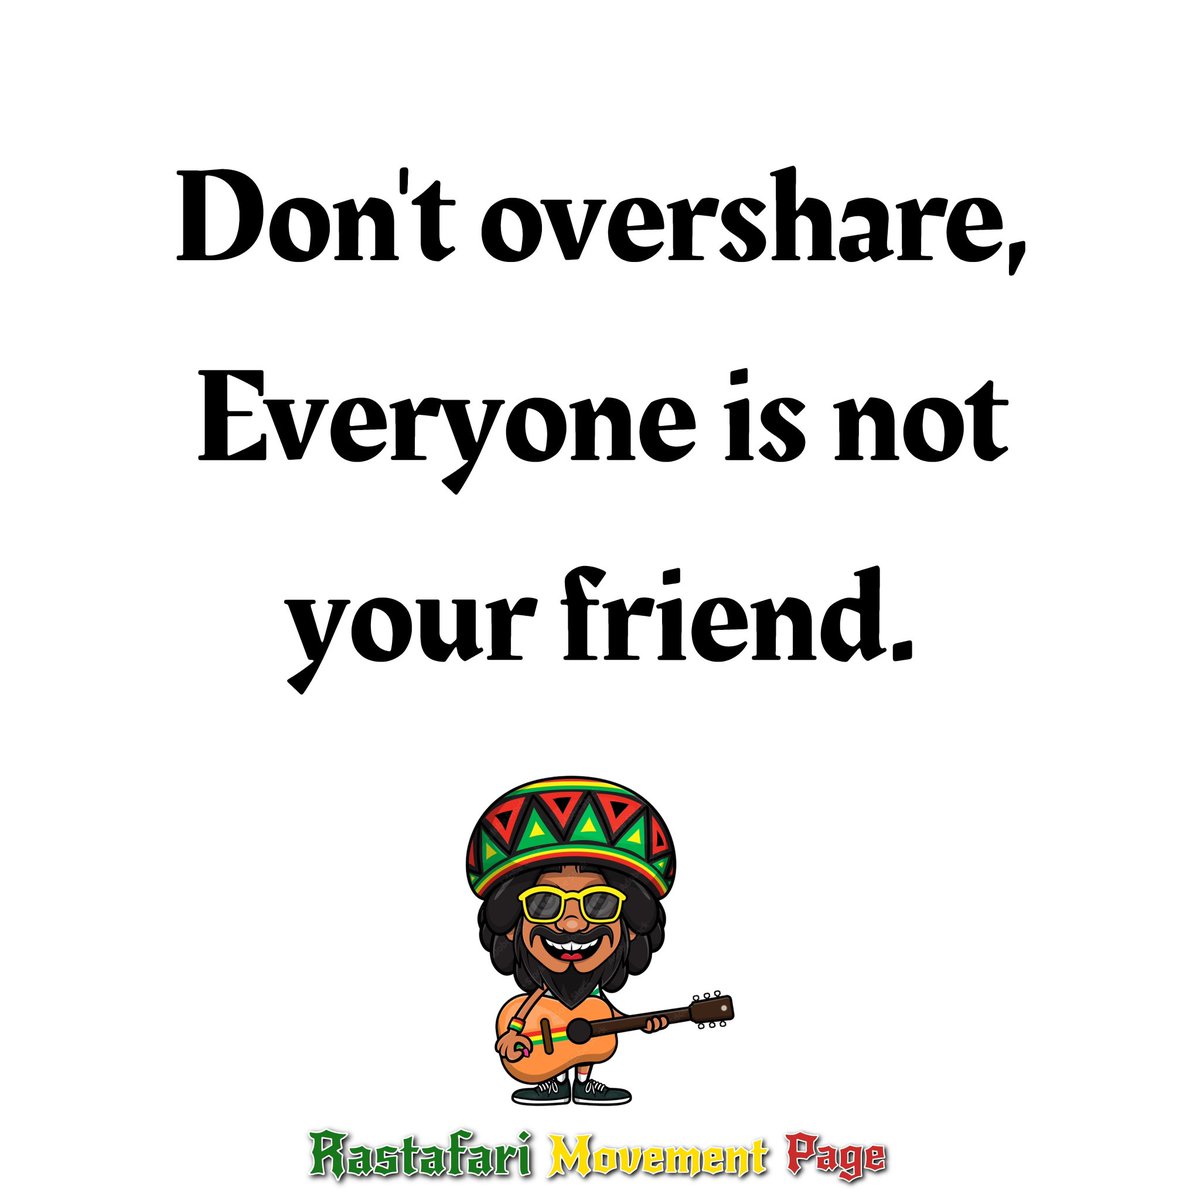 Don't overshare, Everyone is not your friend.